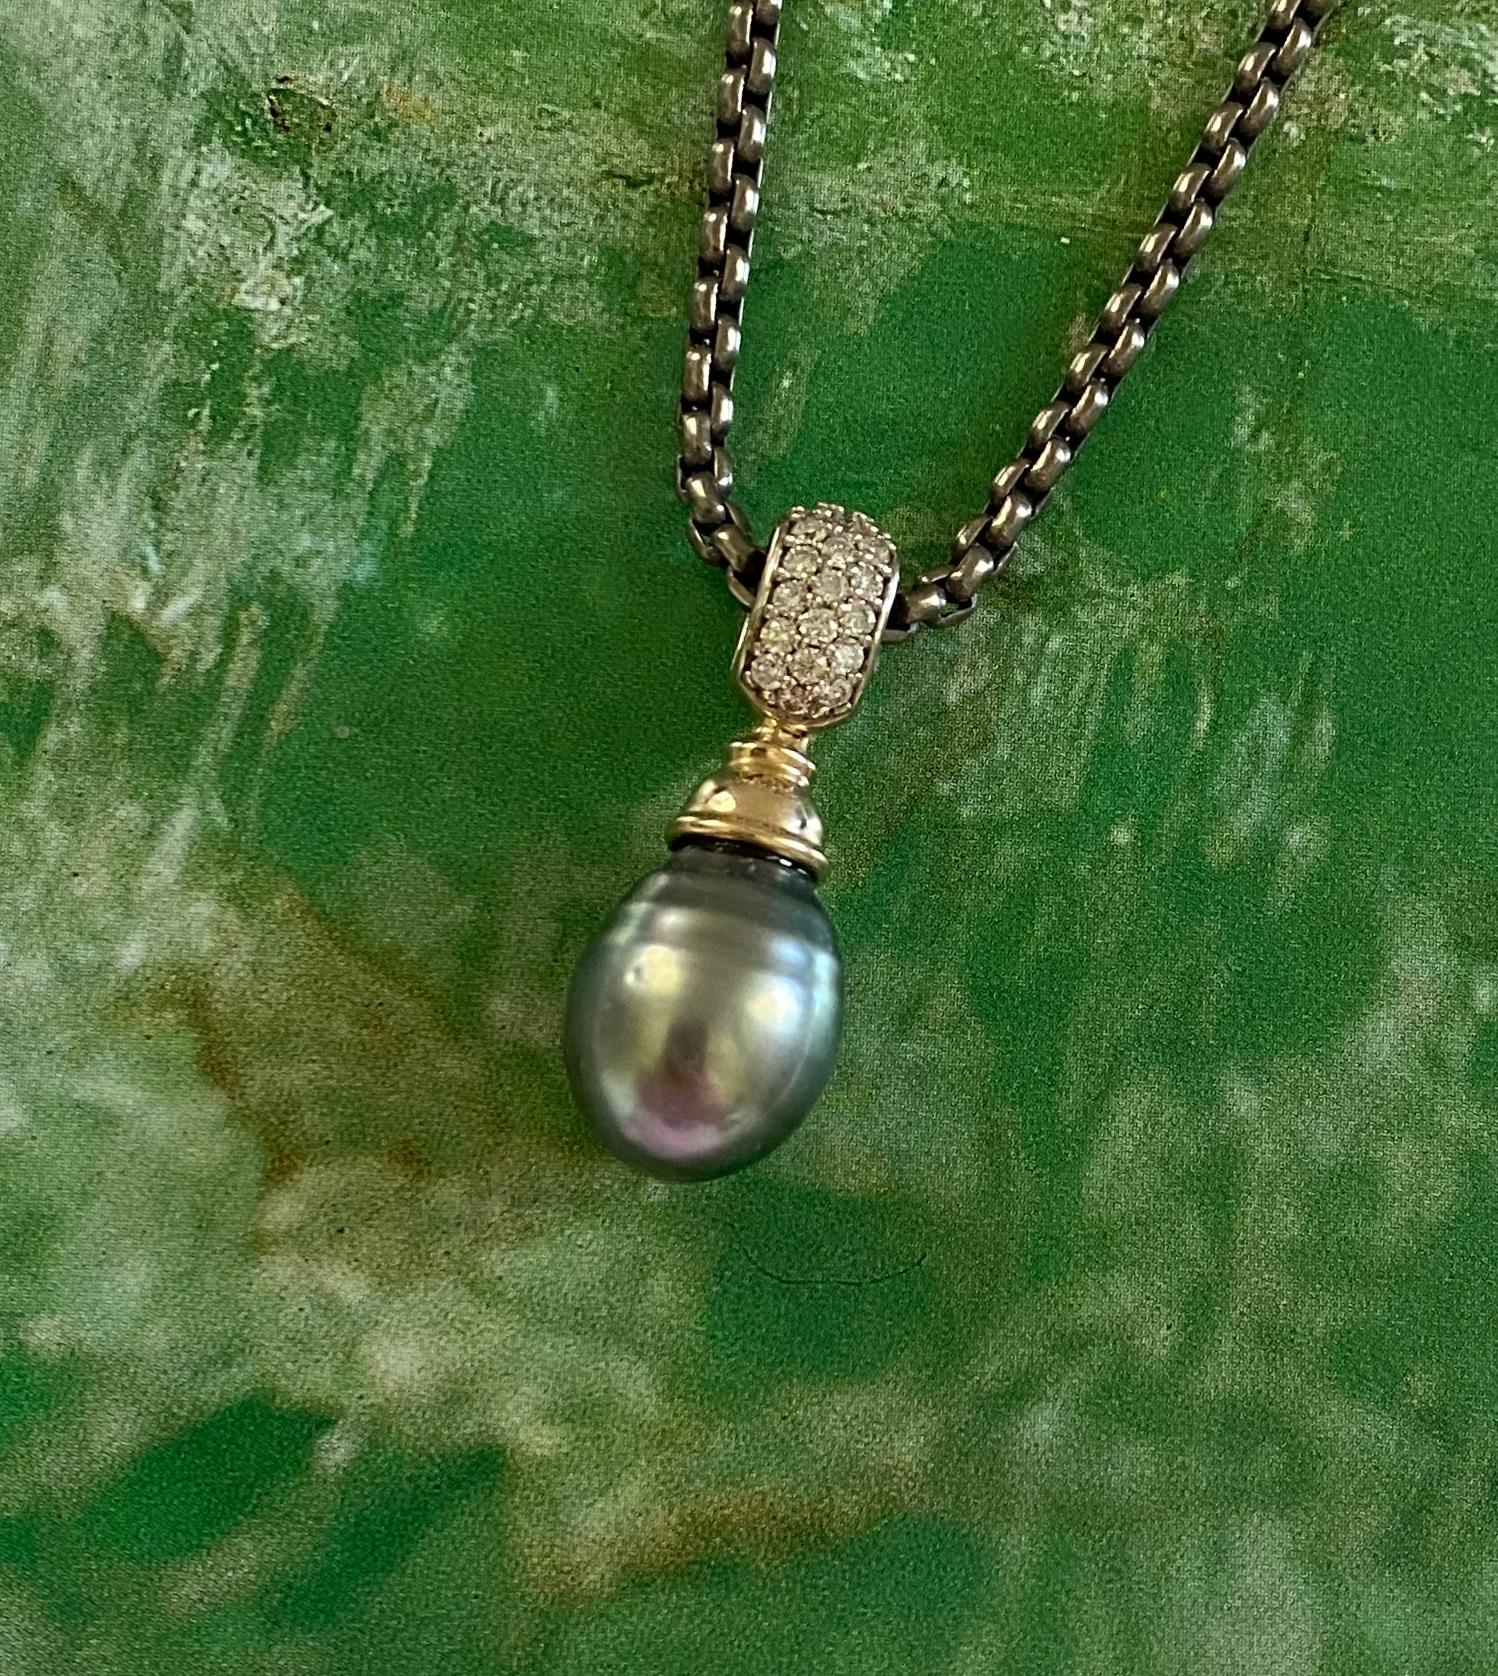 Tahitian pearl is featured in this elegant drop pendant.  The pearl is a beautiful medium gray color with undertones of green and blue.  The gem has a couple minor dimples but possesses a rich luster that makes this a very desirable pearl.  The